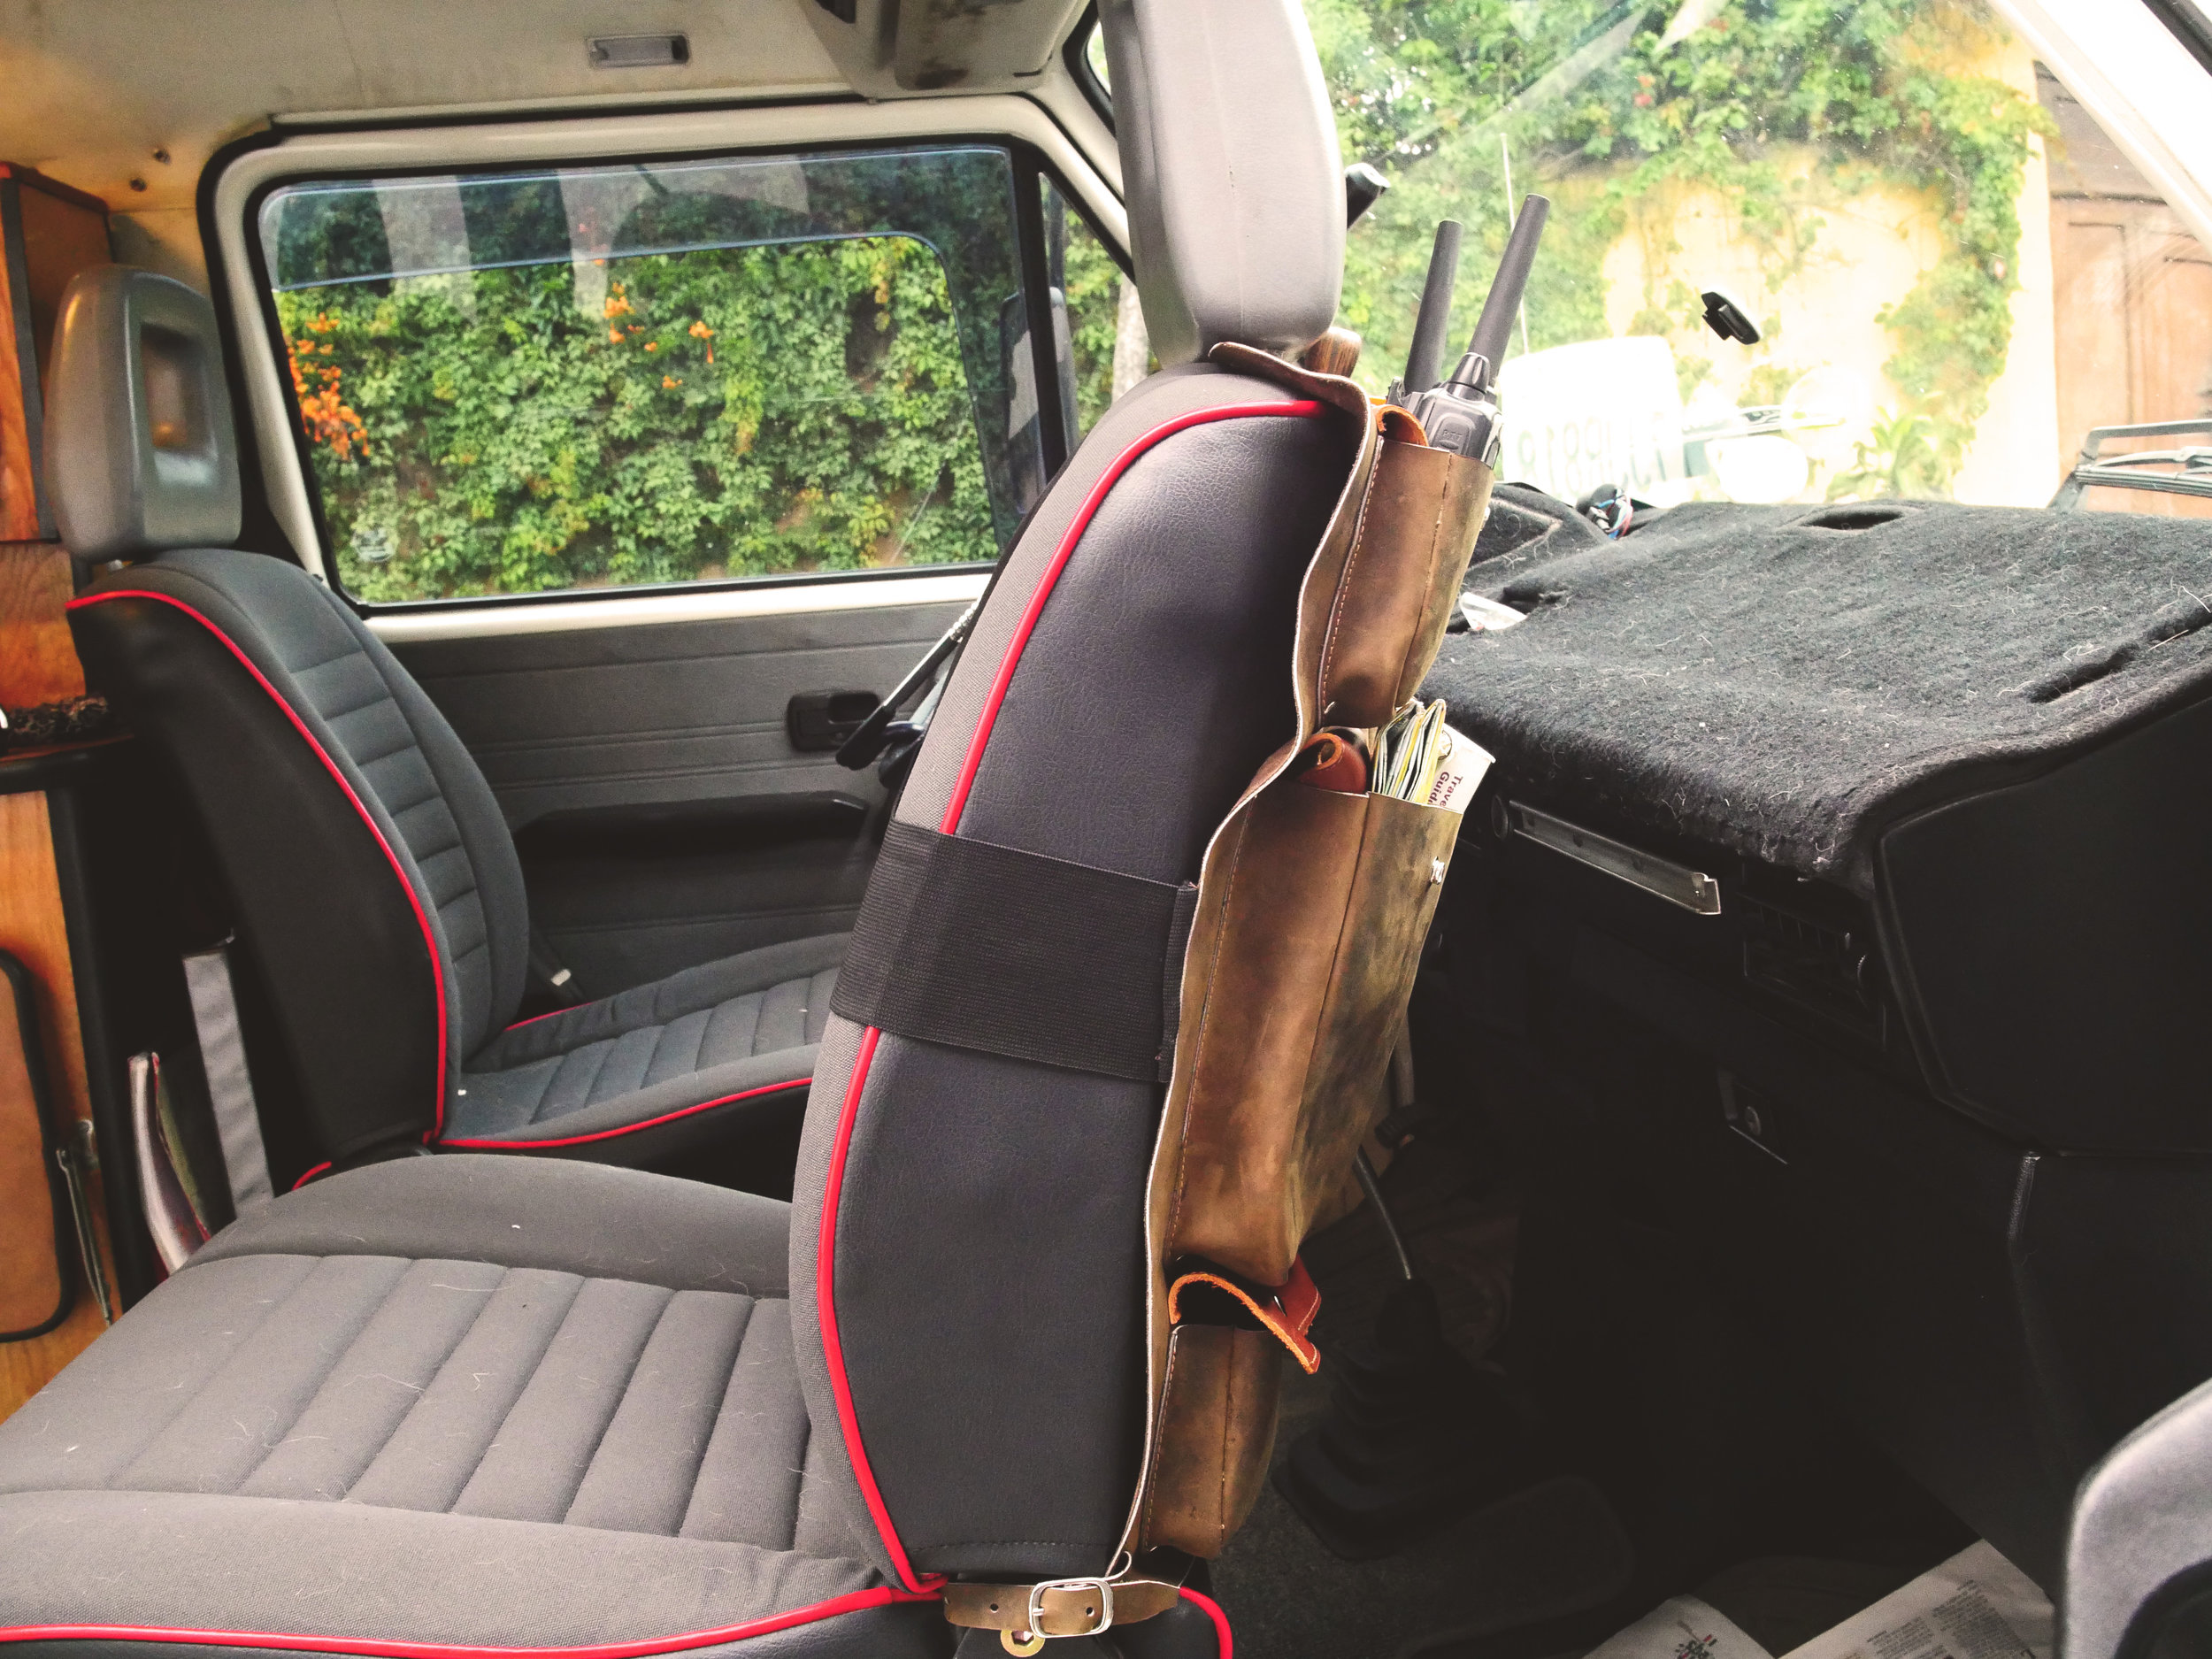 Vw Vanagon Seat Covers - Velcromag